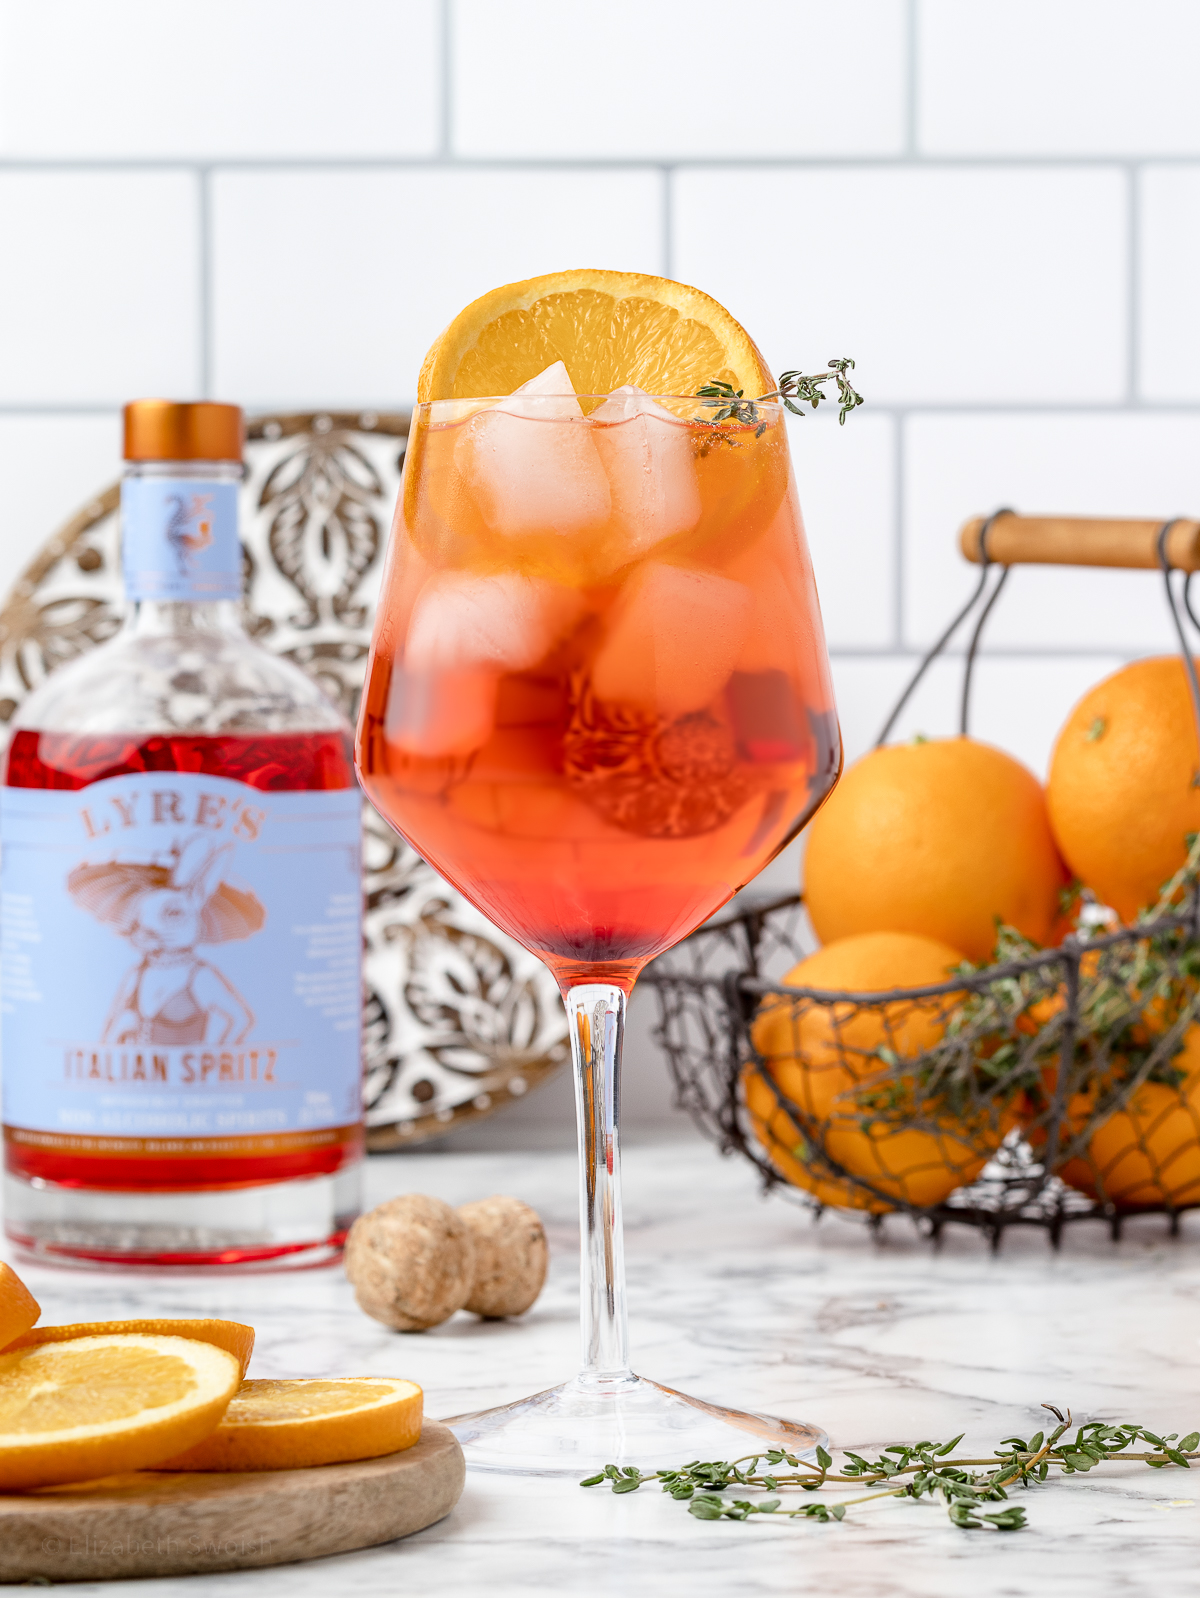 Non alcoholic Aperol spritz garnished with an orange slice and a sprig of fresh thyme.